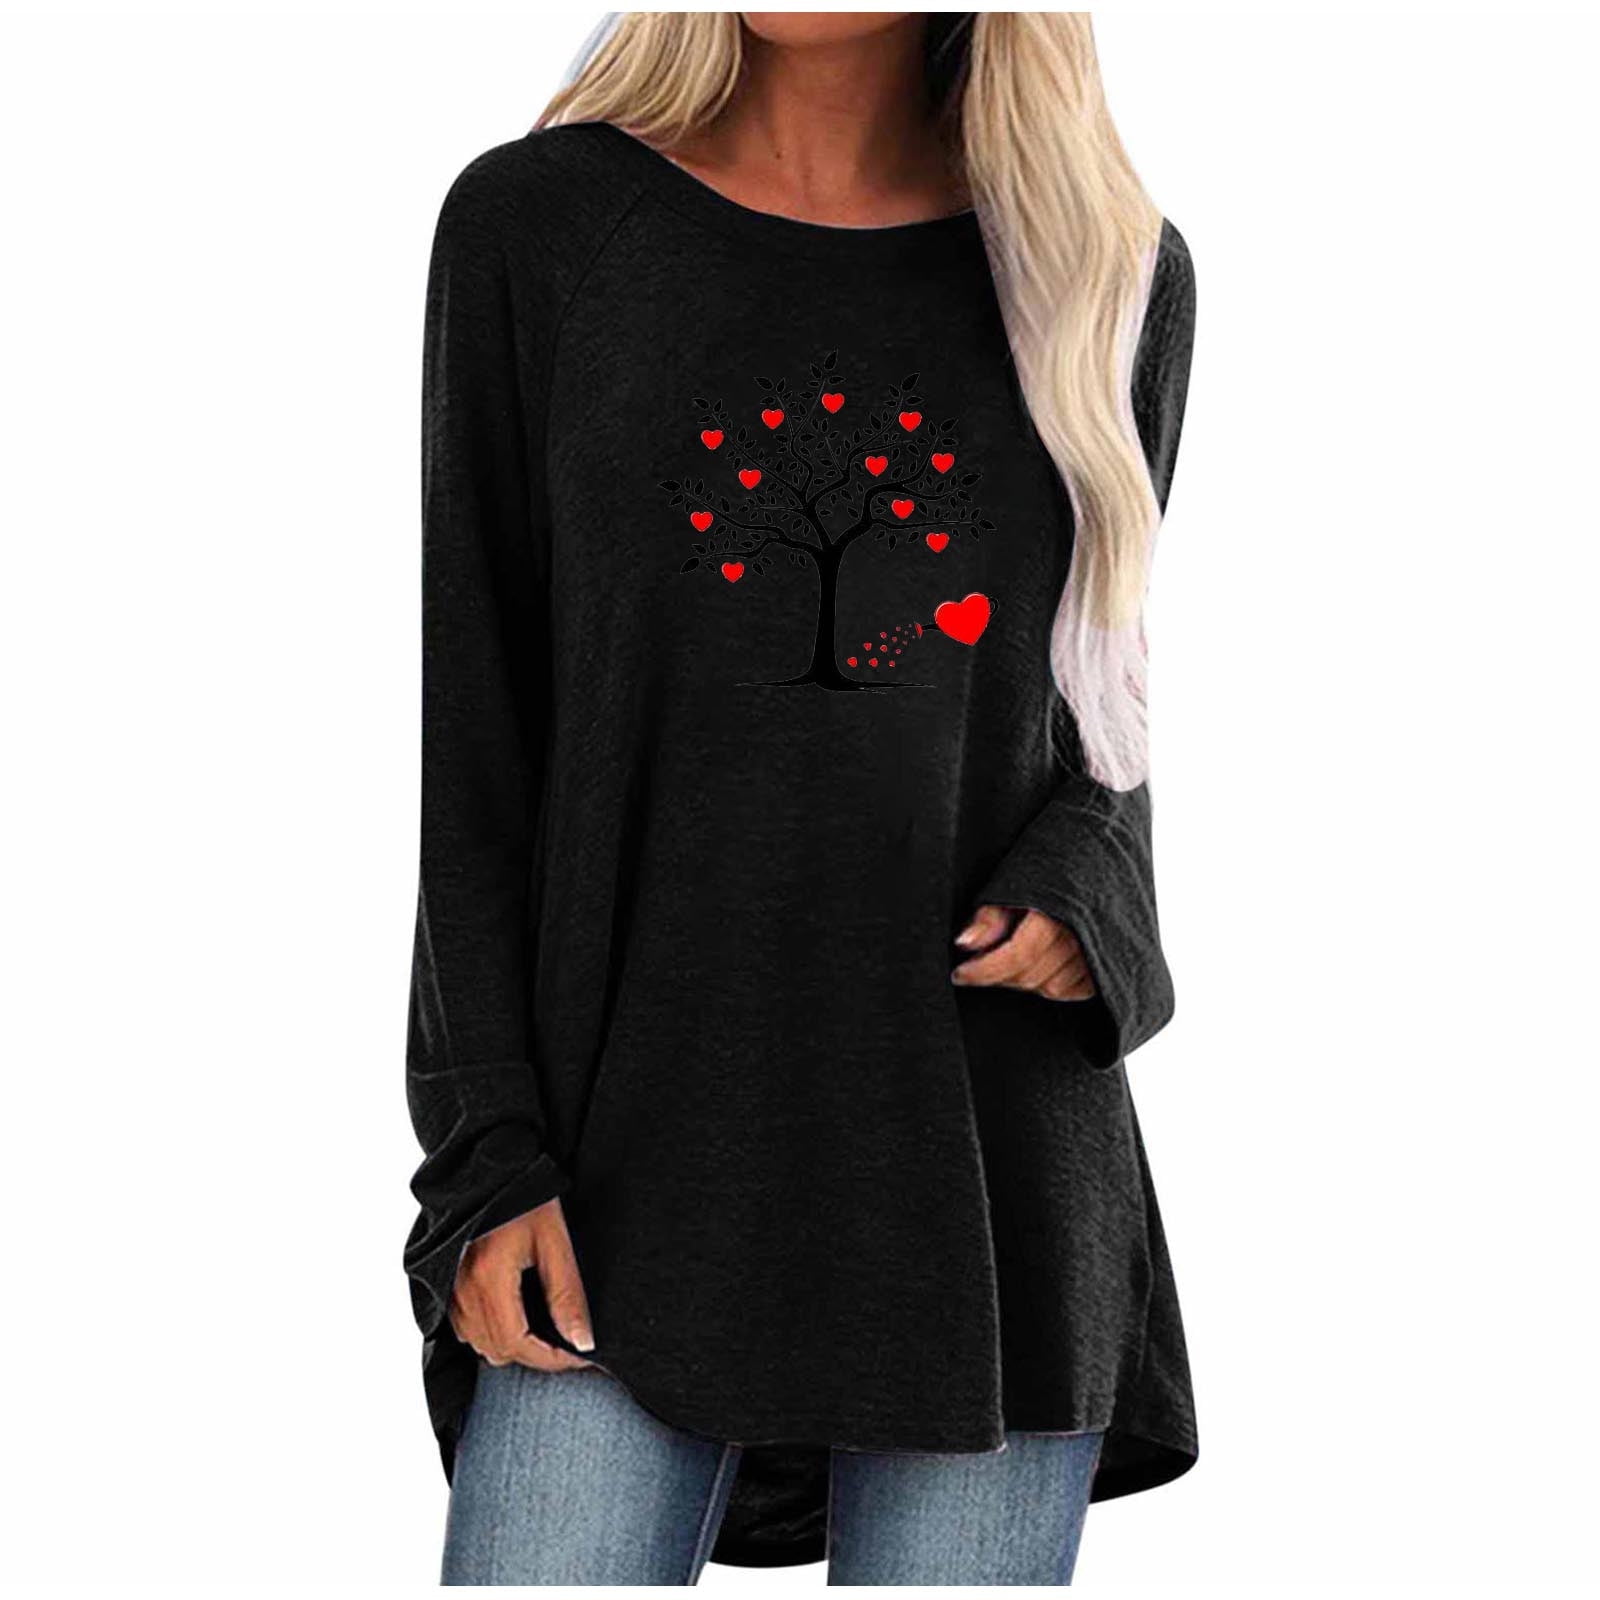 XFLWAM Womens Long Sleeve Tops Shirts Dressy Casual V Neck Floral Print  Graphic Tee Cute Holiday Blouses Pullover Black L 